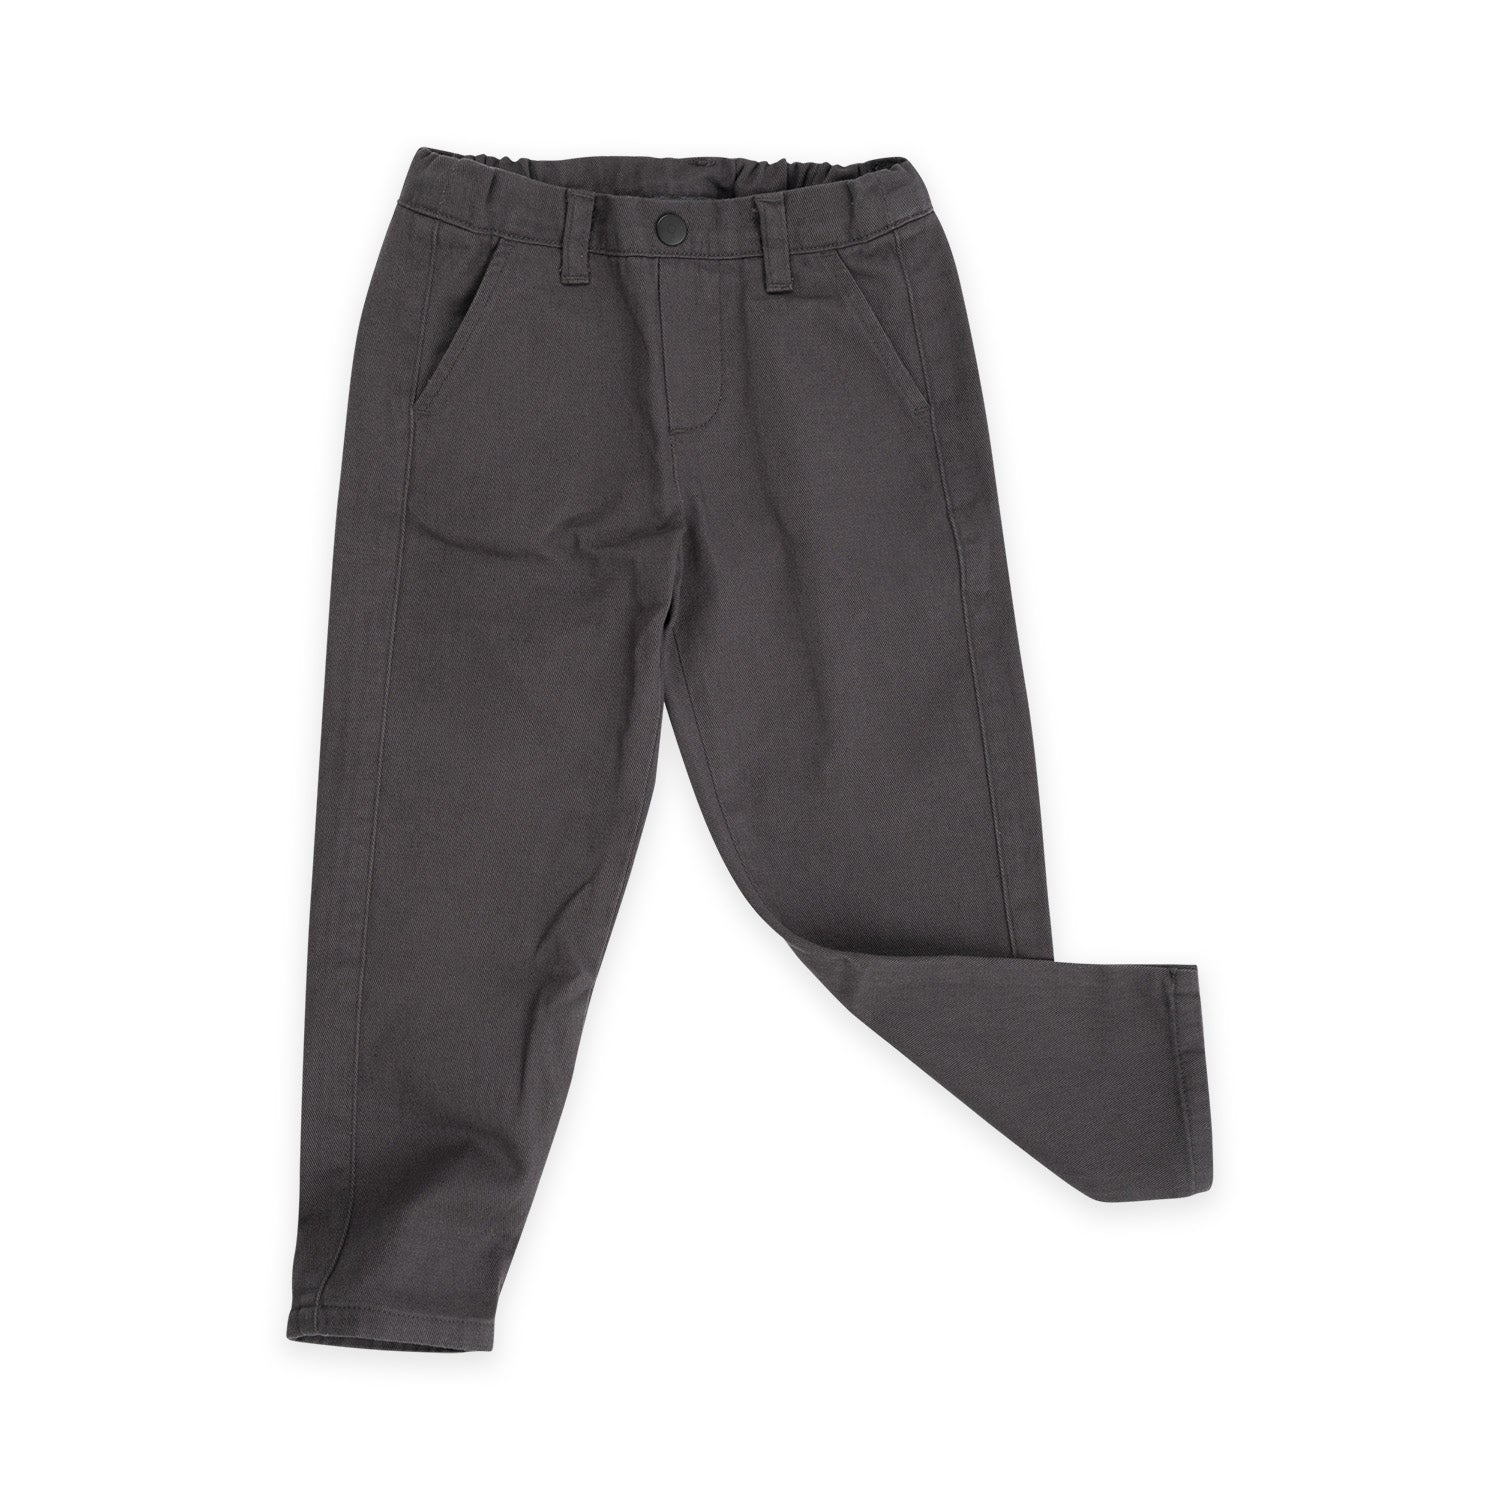 The organic cotton kid's and teen chinos in denim are comfortable and easy-to-wear trousers, can be worn as kids' smart trousers or casual pants. The best quality kids chino's we could find, and also the most stylish ones. Shop kid's and teen chinos and pants/joggers online at MiliMilu in Hong Kong and Singapore.